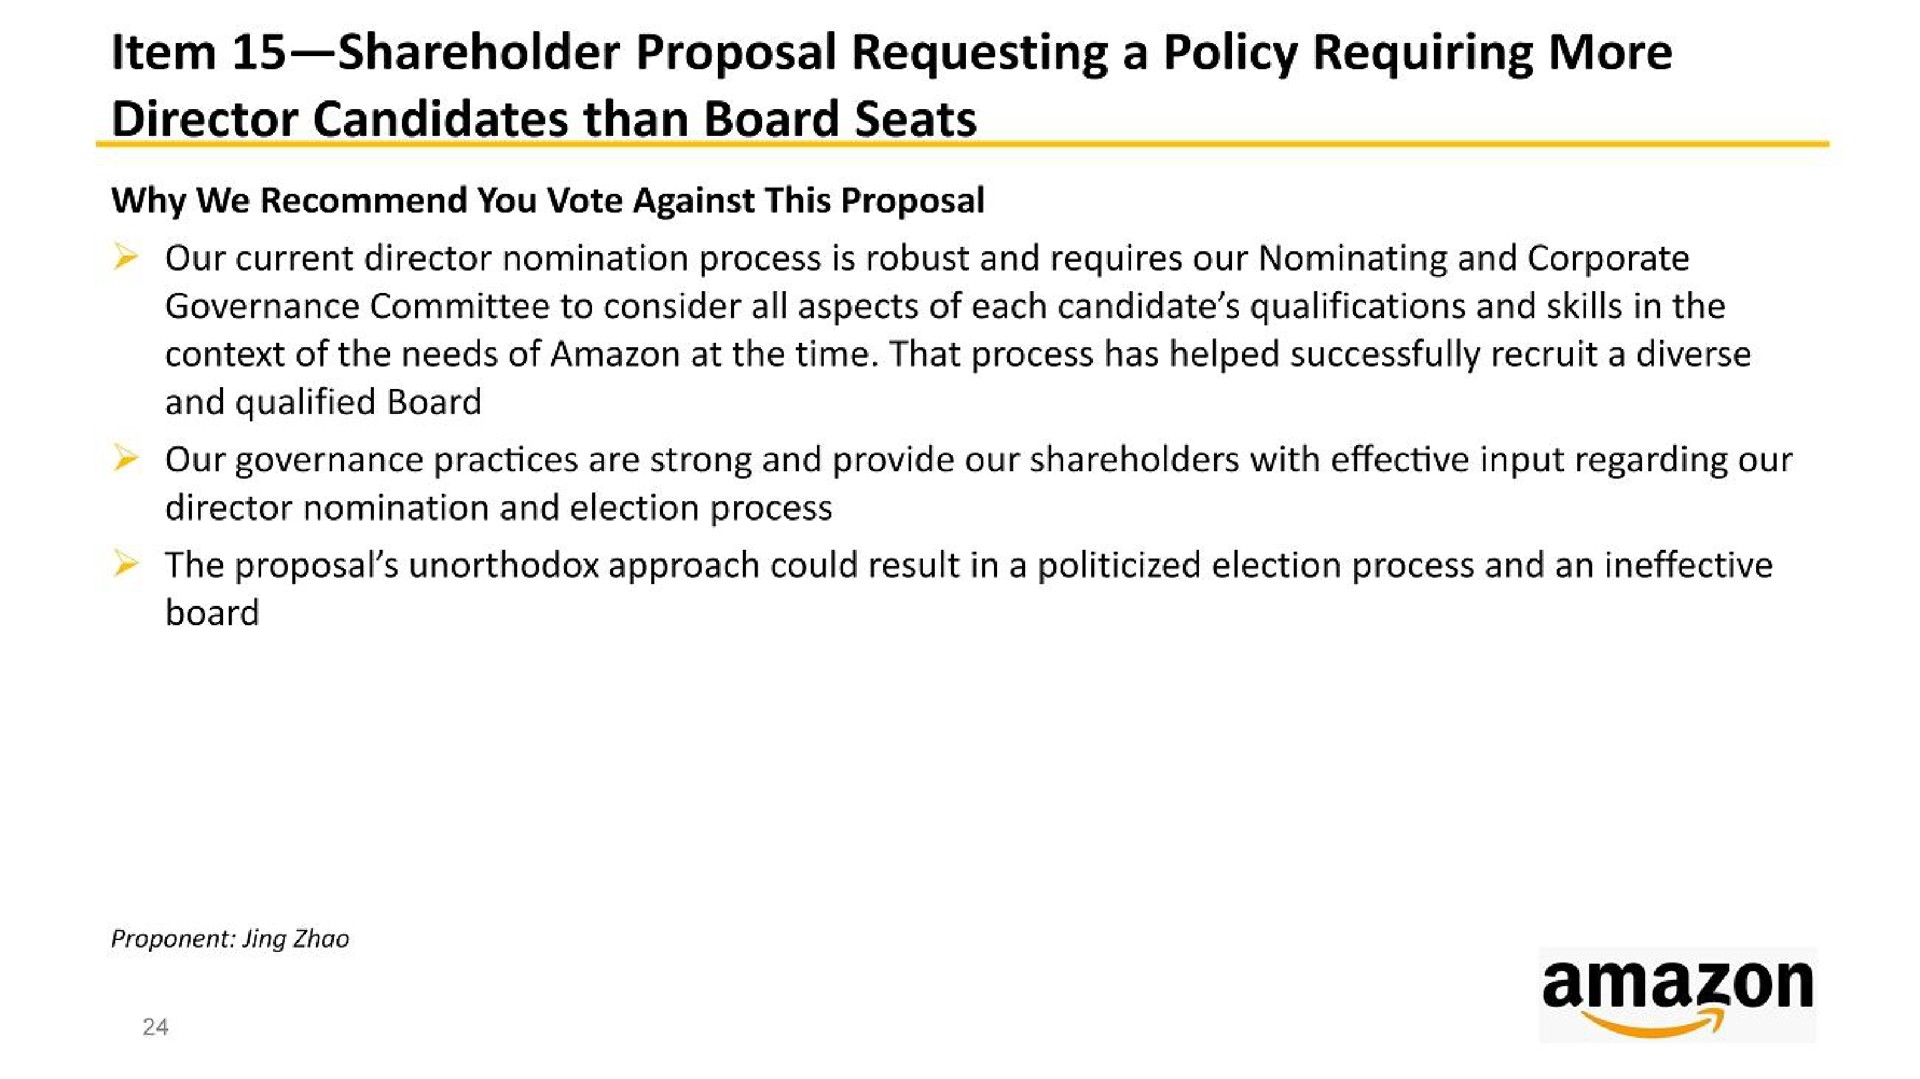 item shareholder proposal requesting a policy requiring more director candidates than board seats | Amazon